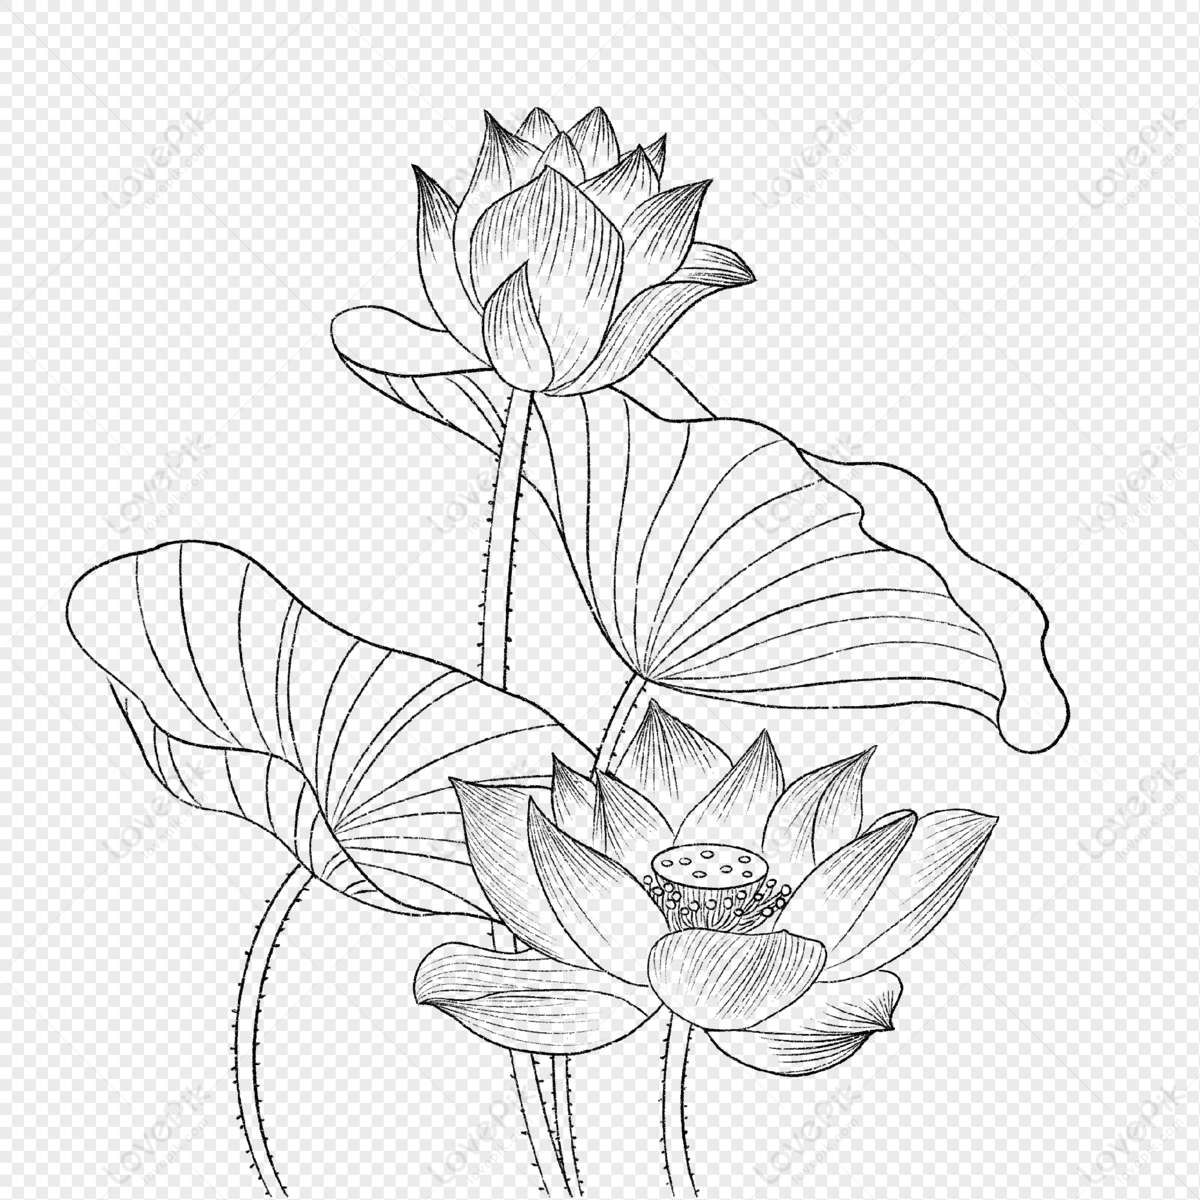 How To Make A Lotus Drawing Easy | How To Draw A Lotus Flower Very Easy  Step By Step - YouTube